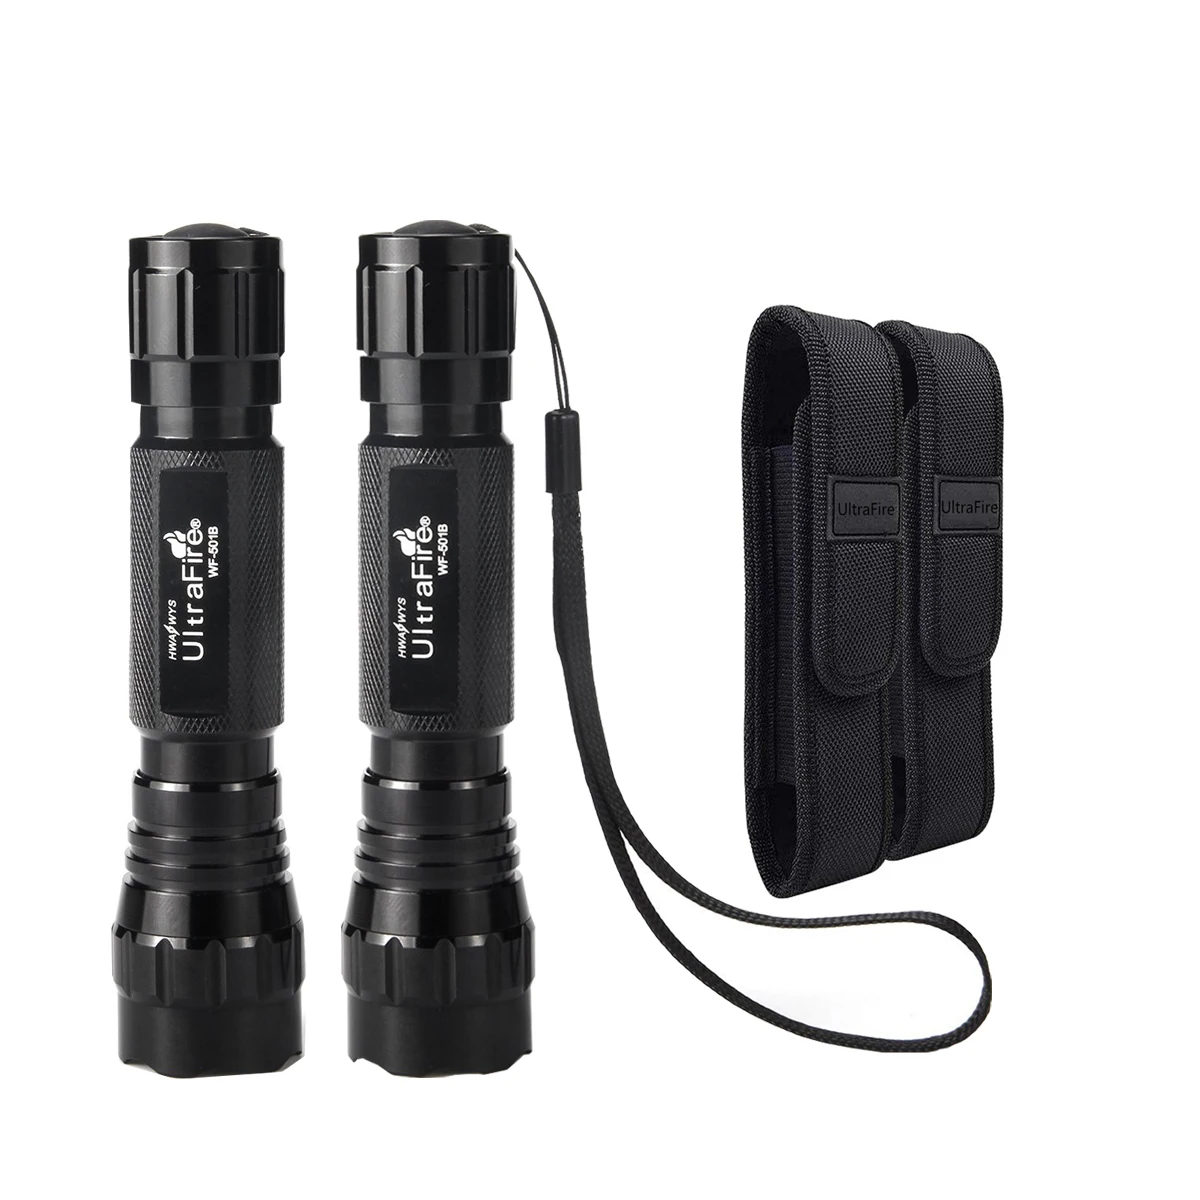 

UltraFire 2pcs WF-501B LED Police Flashlight High Power Tactical Lantern EDC Torch Light for Outdoor Camping with 2 Holster